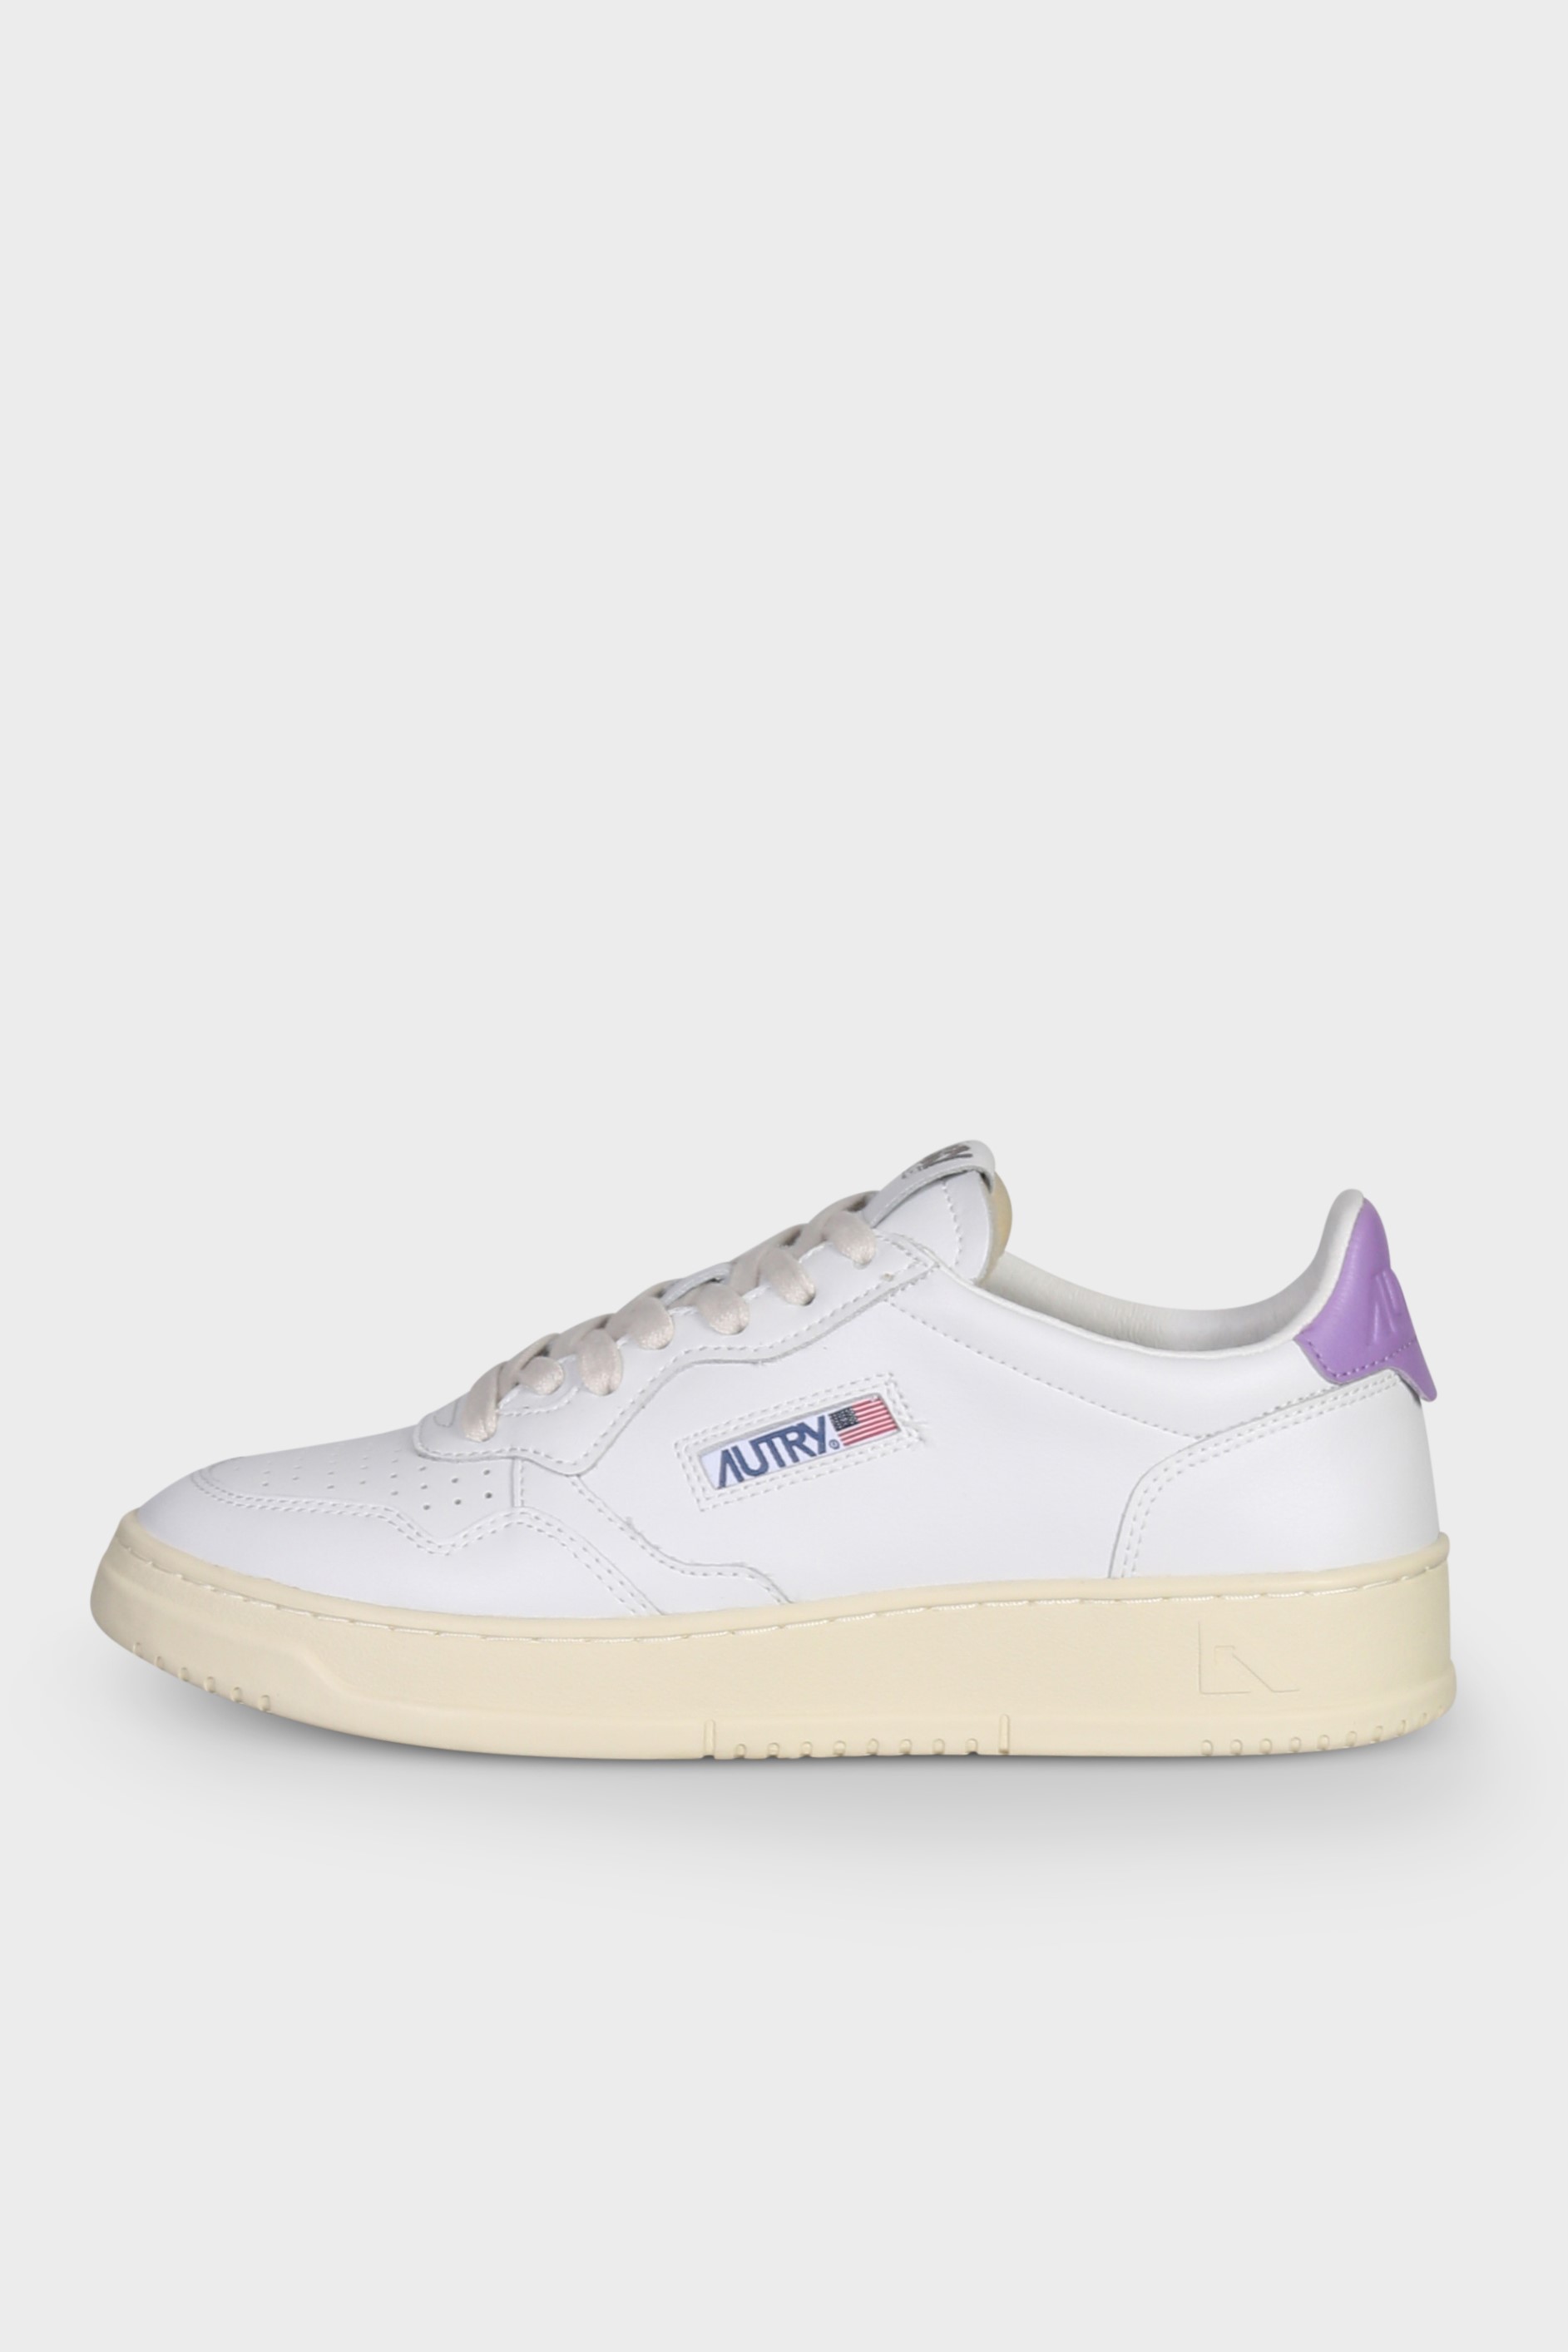 AUTRY ACTION SHOES Sneaker Low in White/White